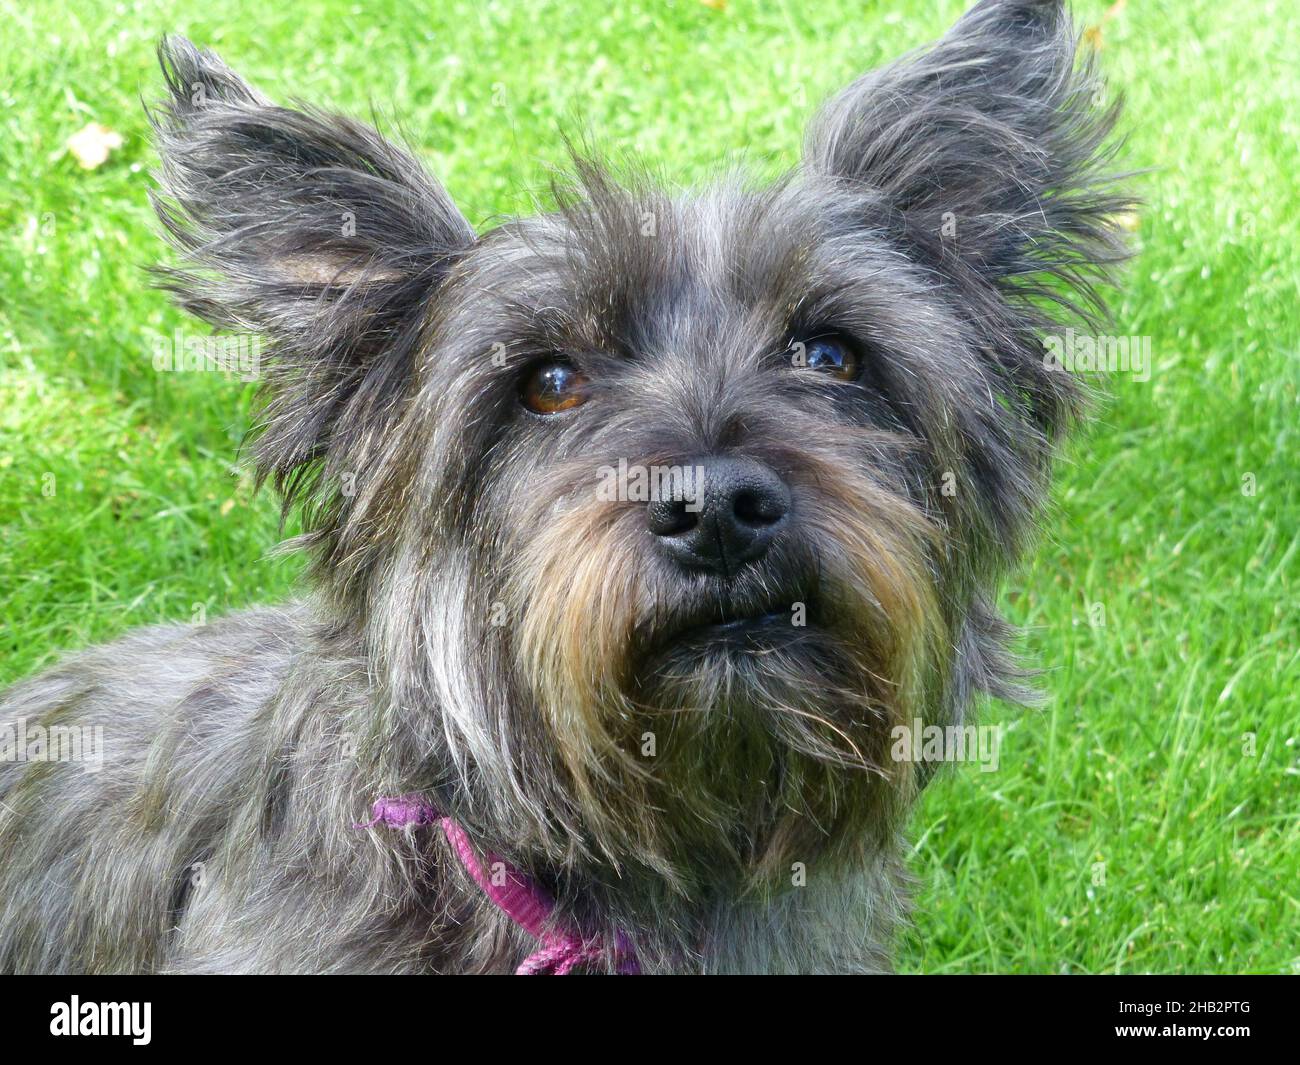 Attractive portage of a small dog which is a cross between a Yorky and a Westie looking up. Stock Photo